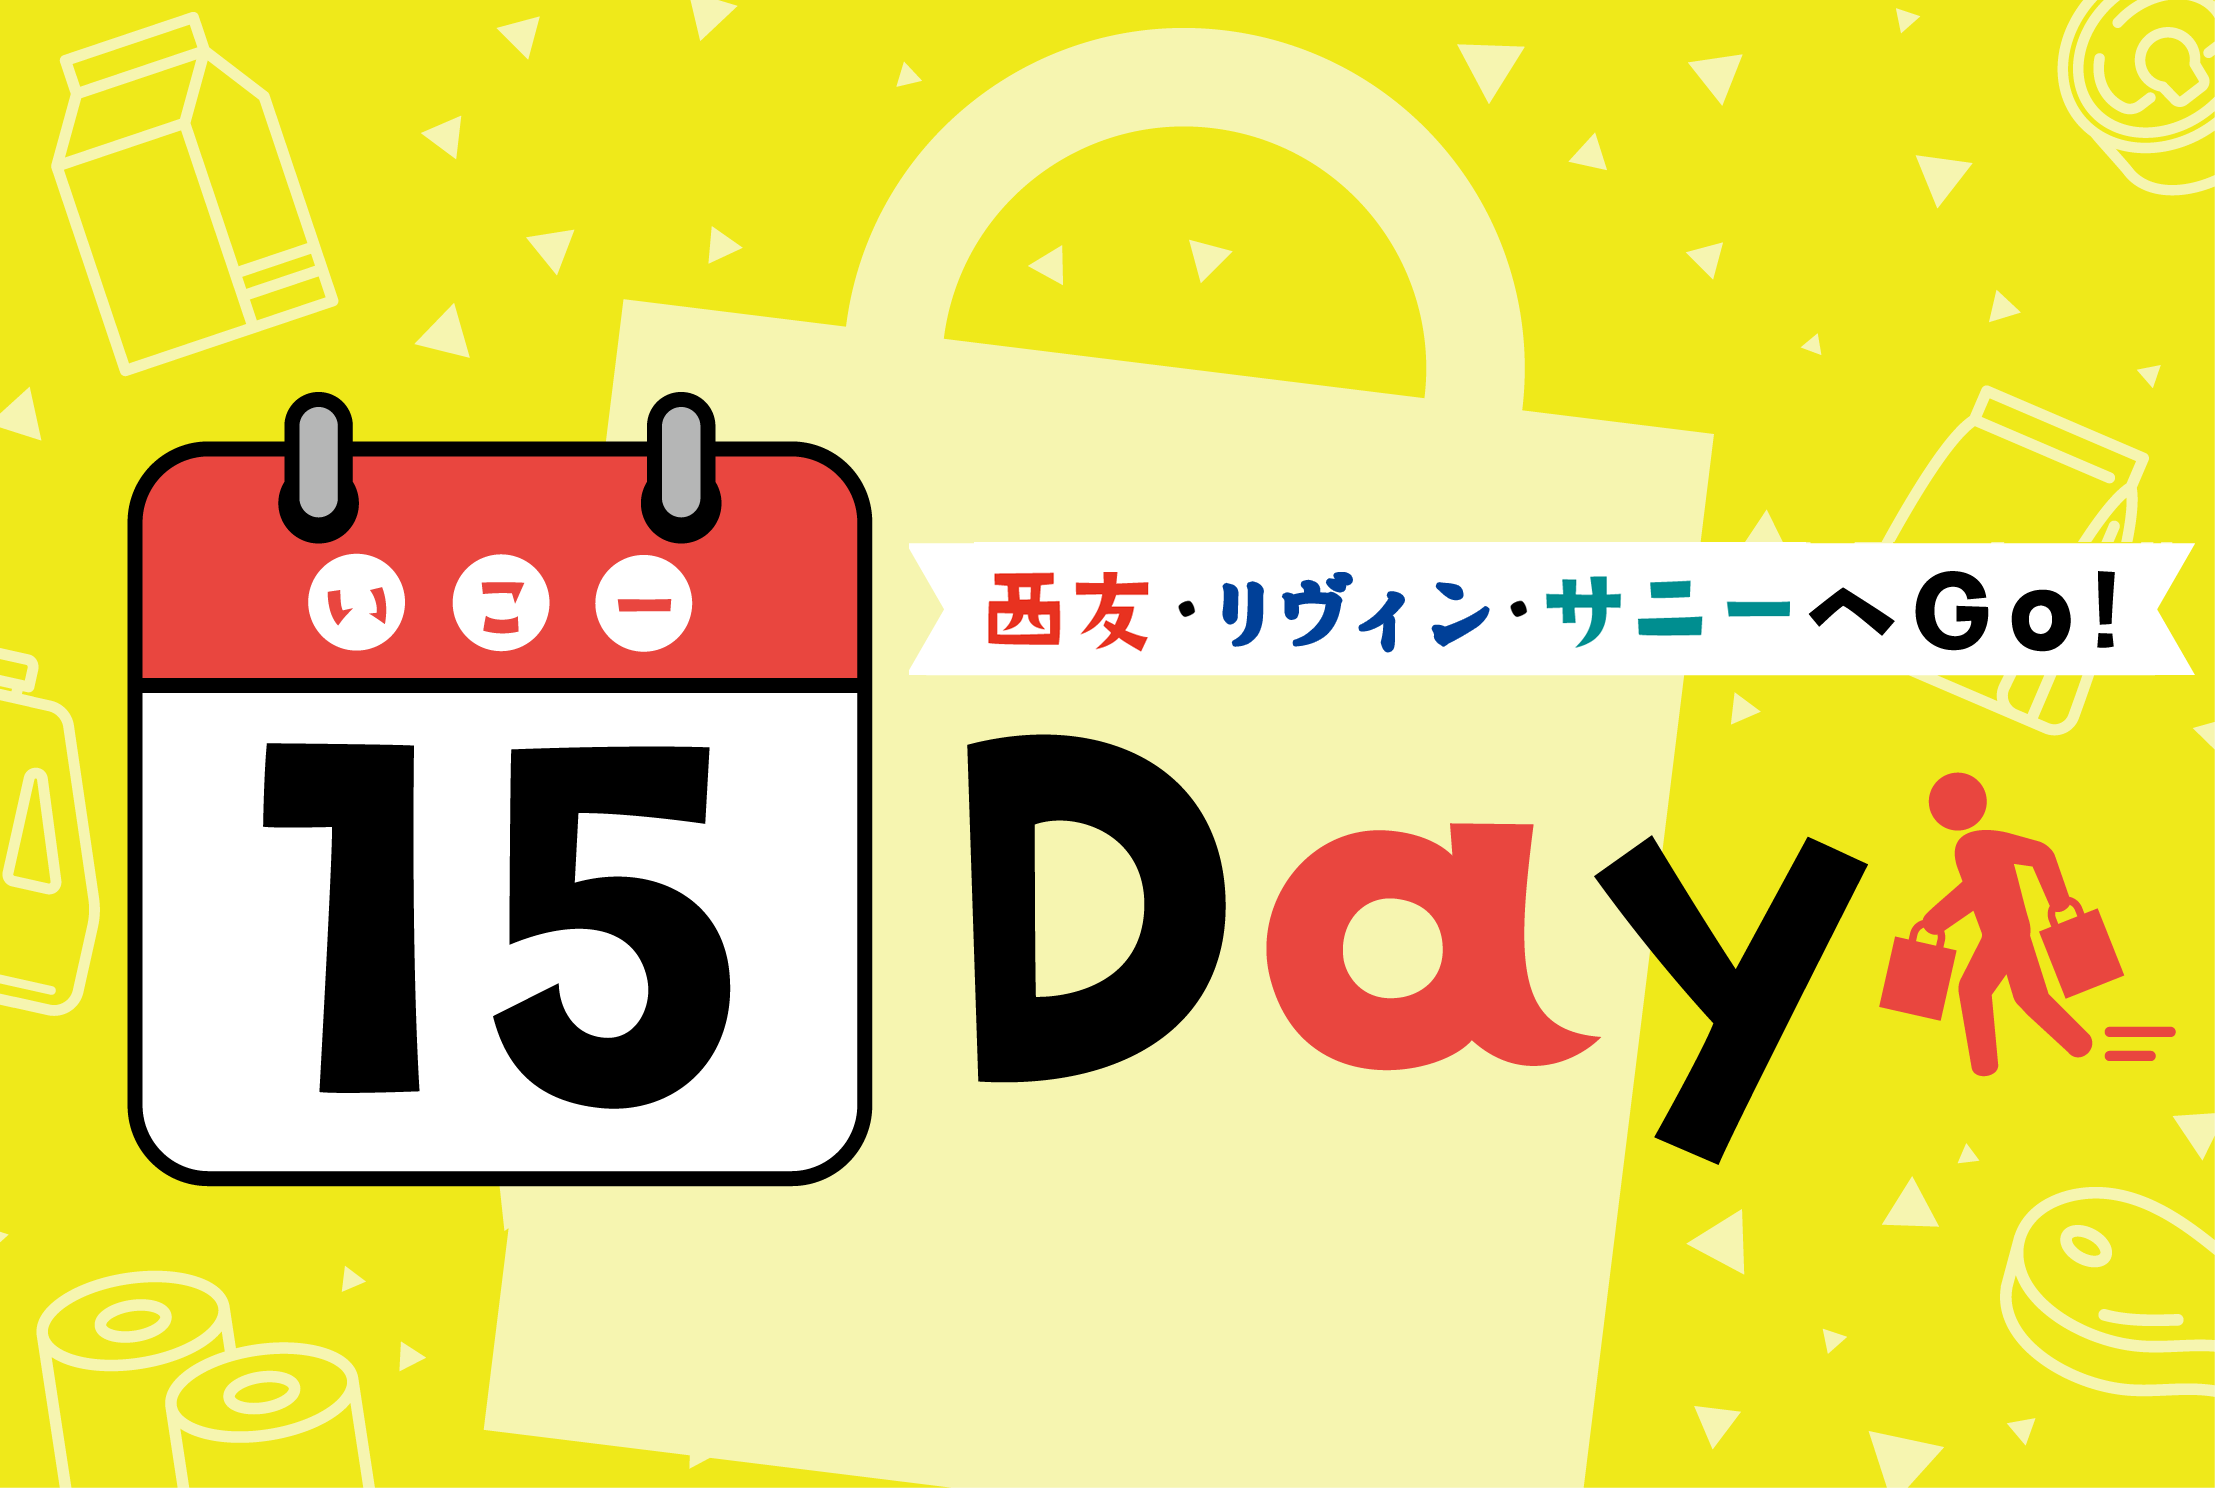 15Day（いこーDay）